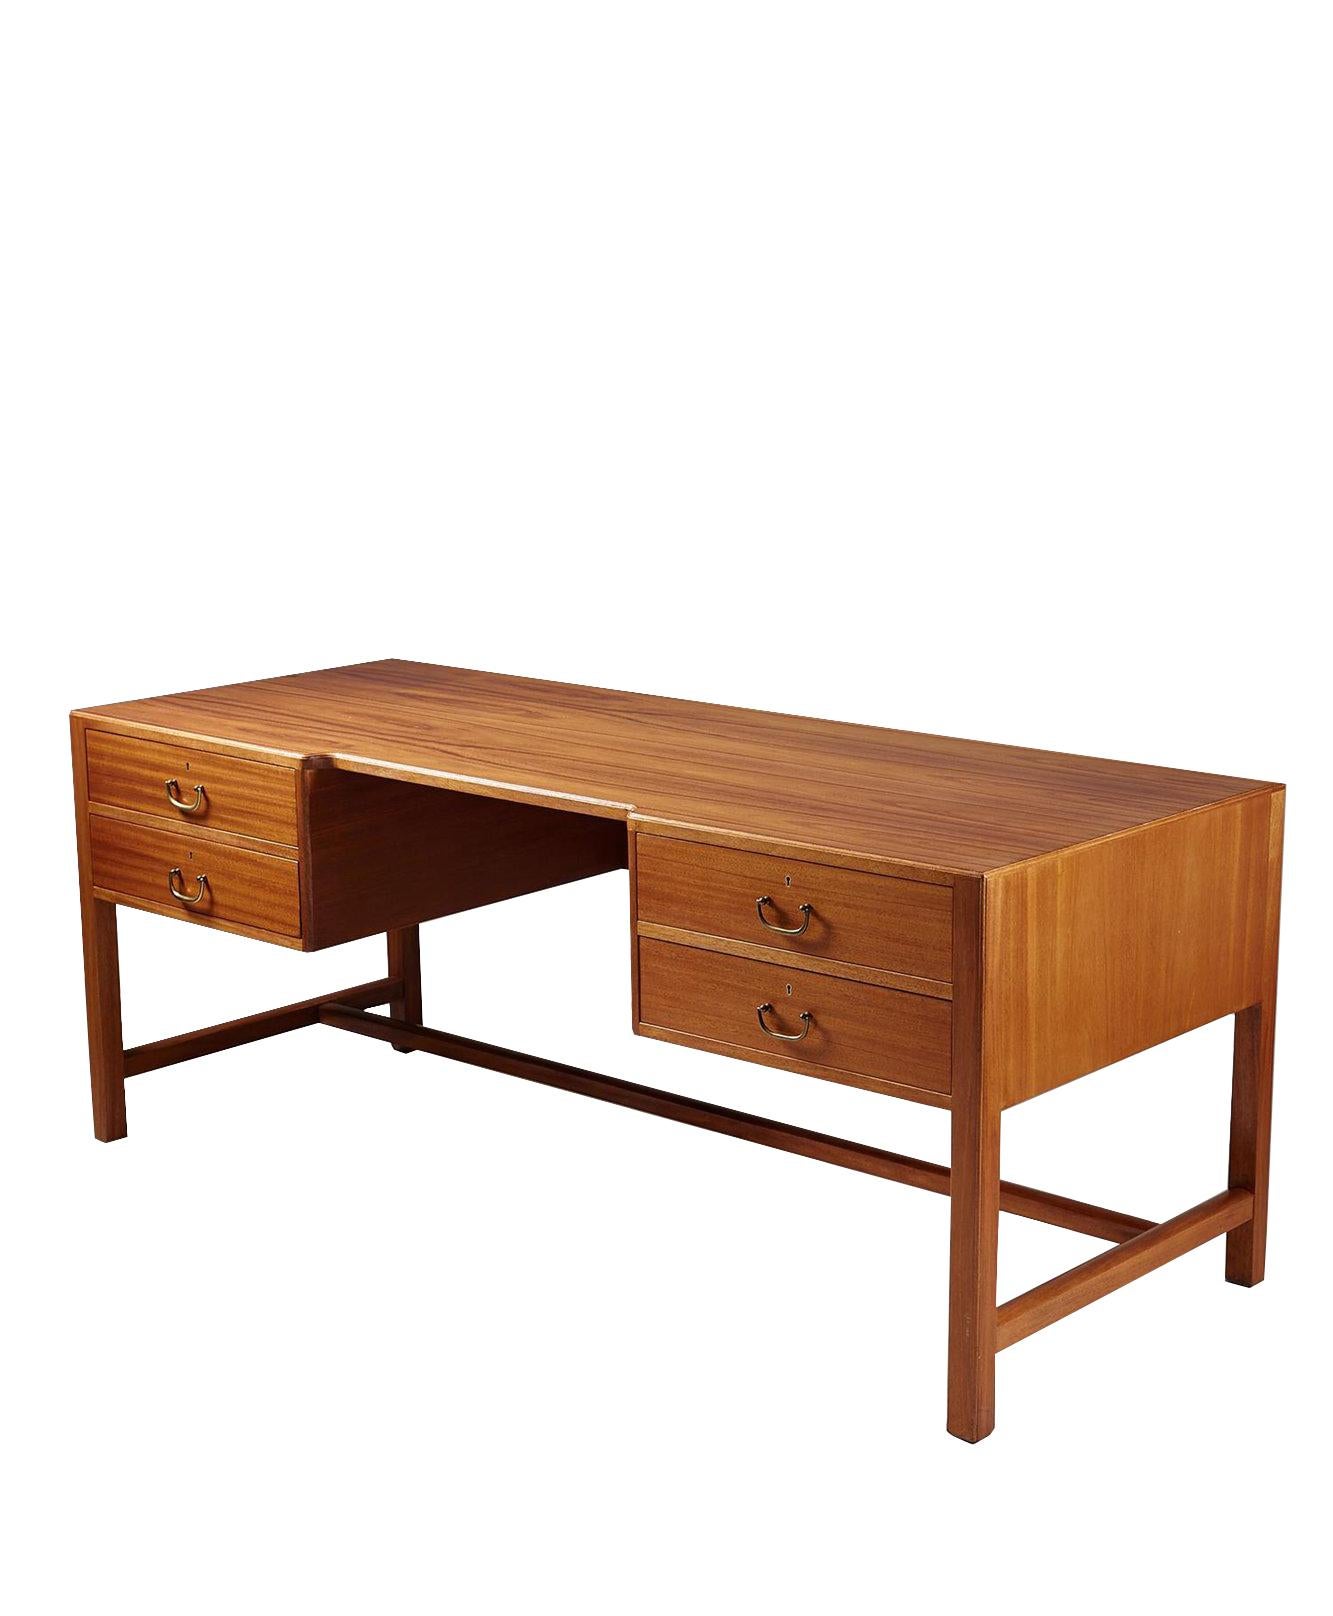 Vintage Josef Frank sweeping crotch mahogany four-drawer desk in good condition with brass hardware; circa 1932.

